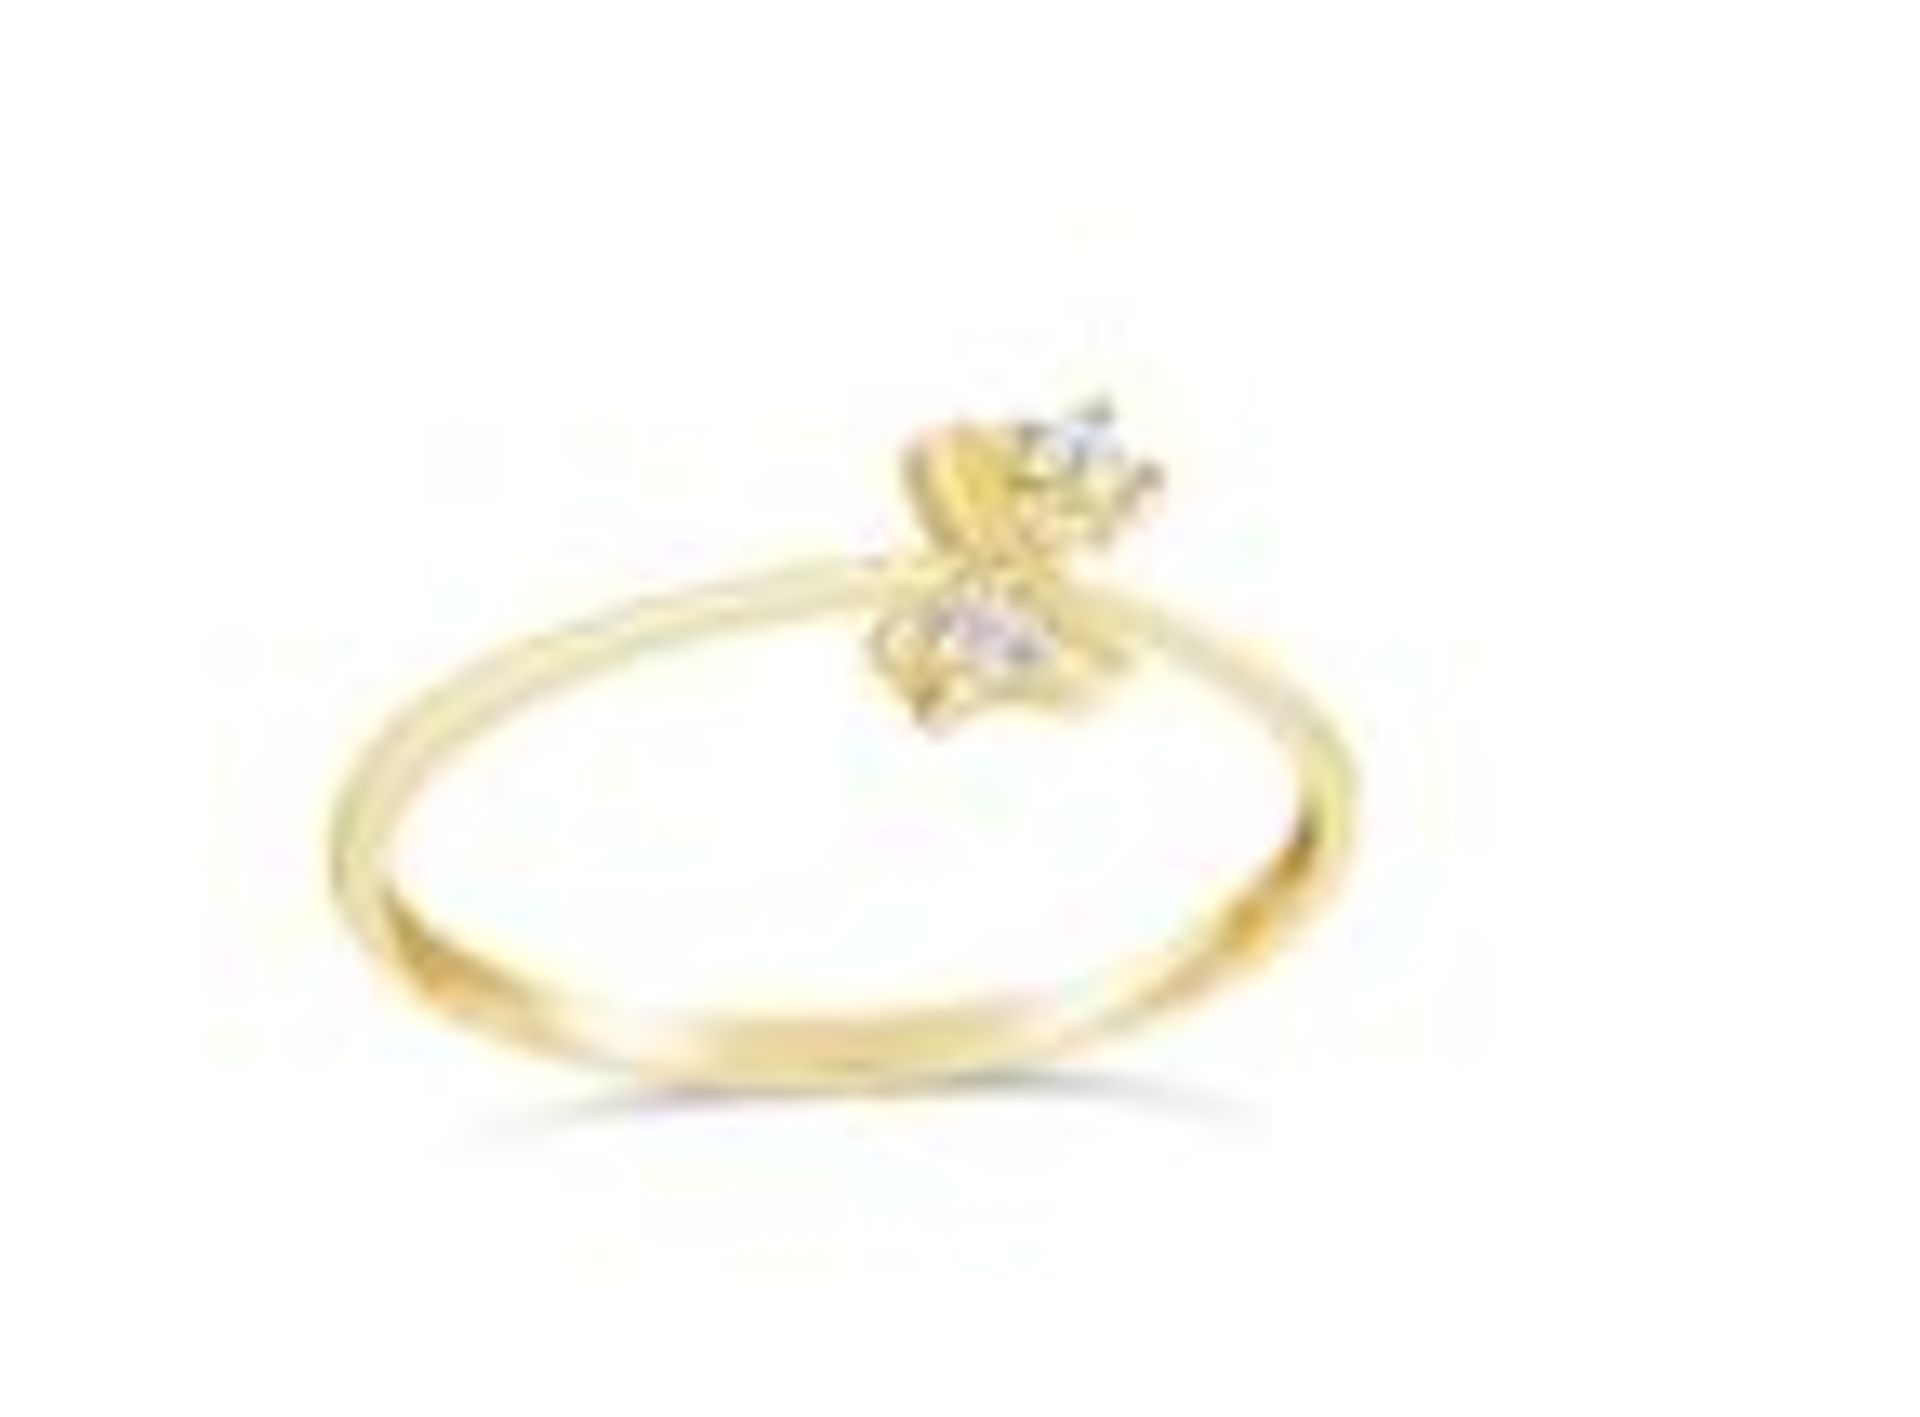 Diamond Ring, 9ct Yellow Gold, Weight 1.15g, Diamond Weight 0.04ct, Colour H, Clarity SI1 - SI2,